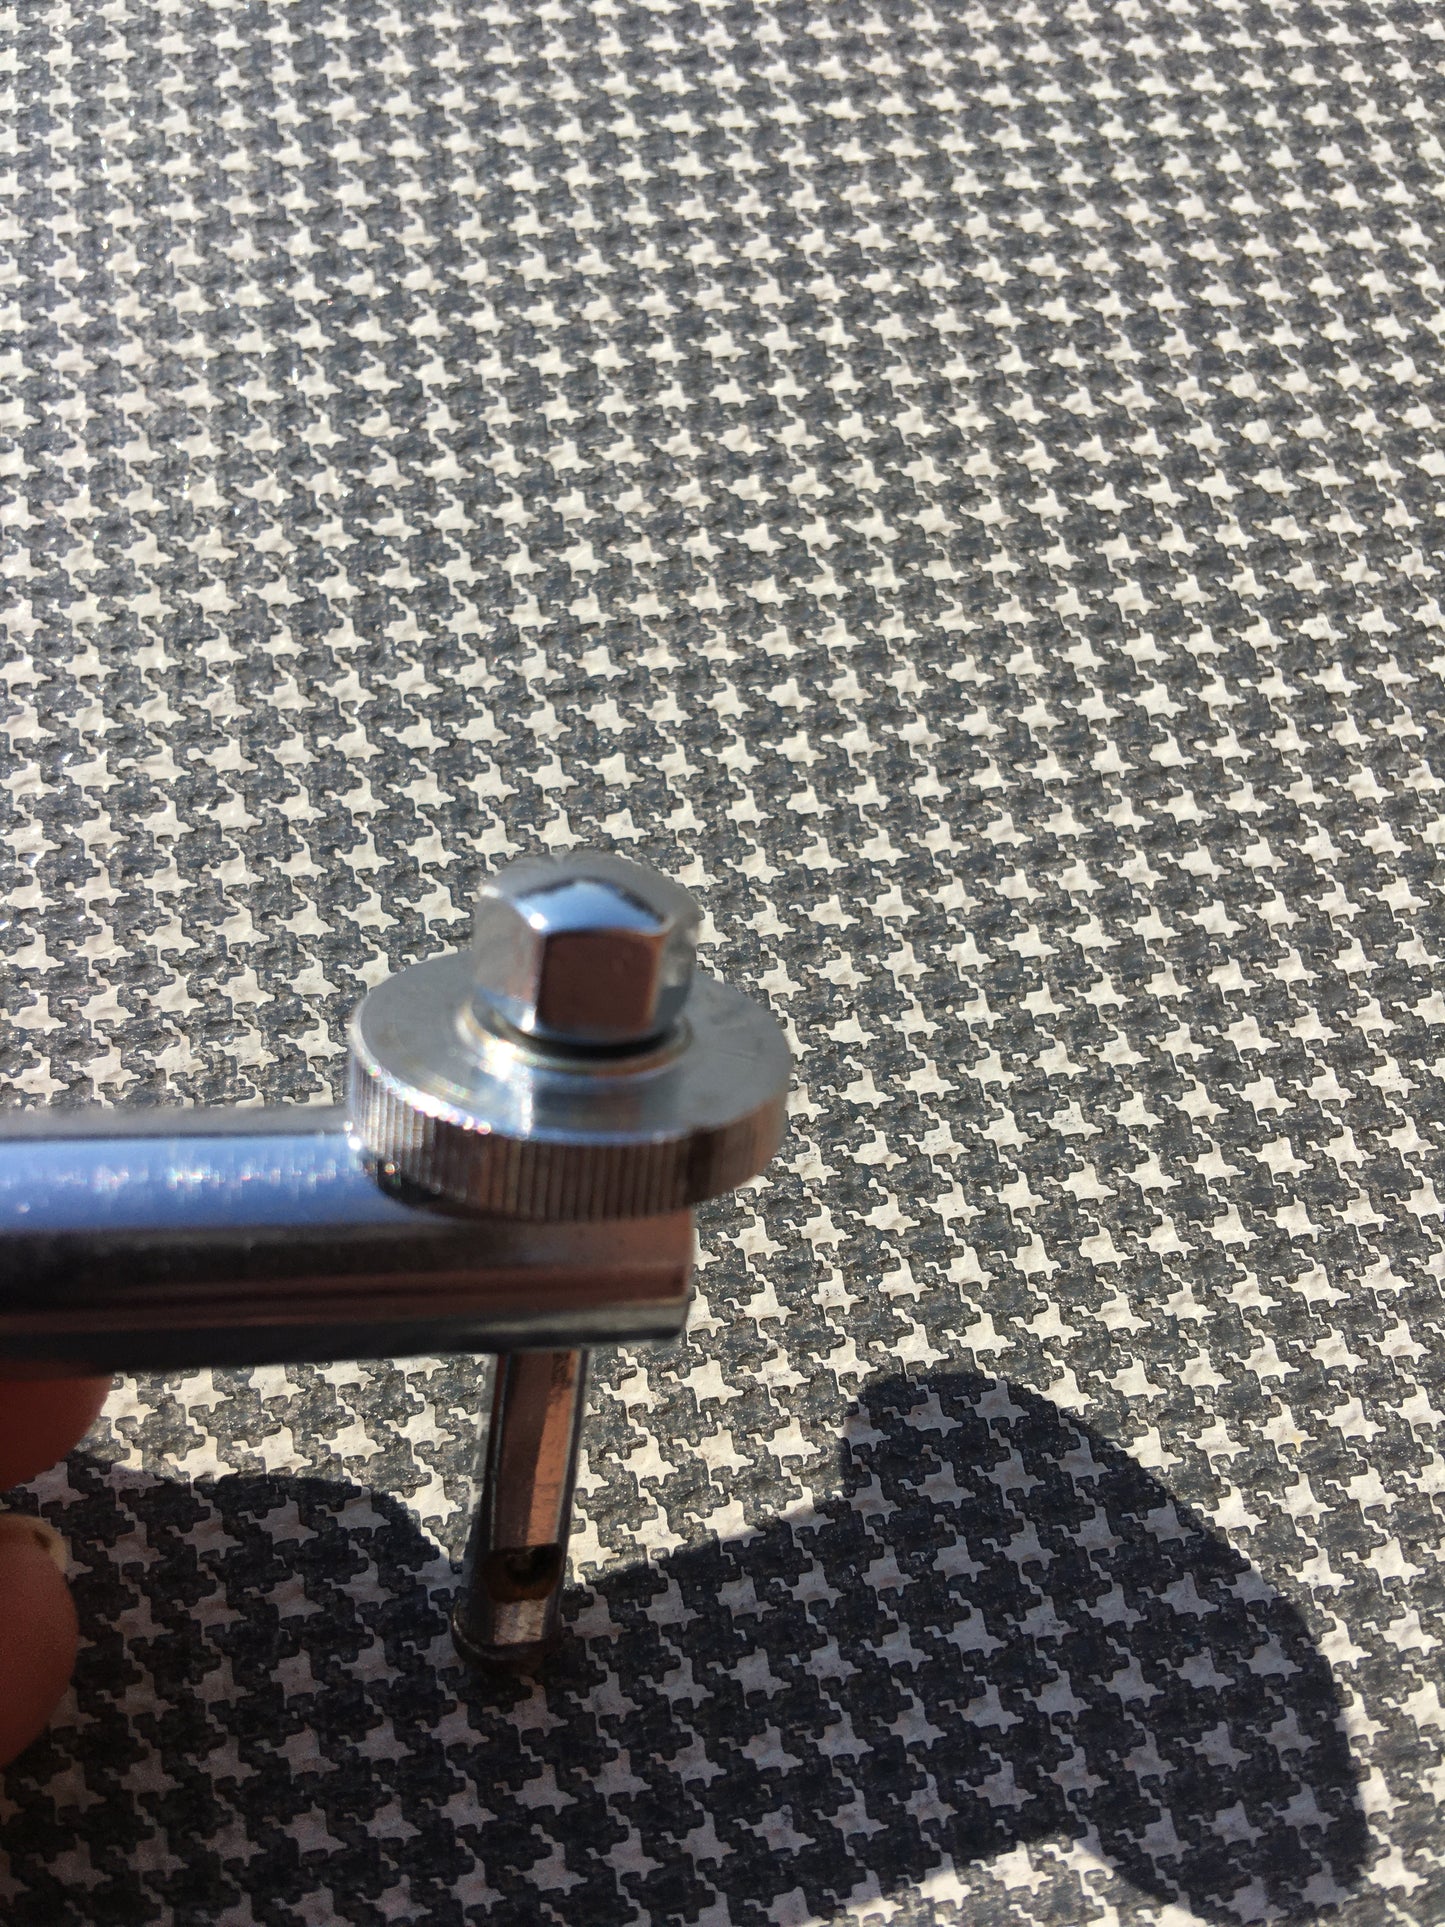 1960s/70s Sonor Tuning Screw Snare Drum Butt Plate Tensioner